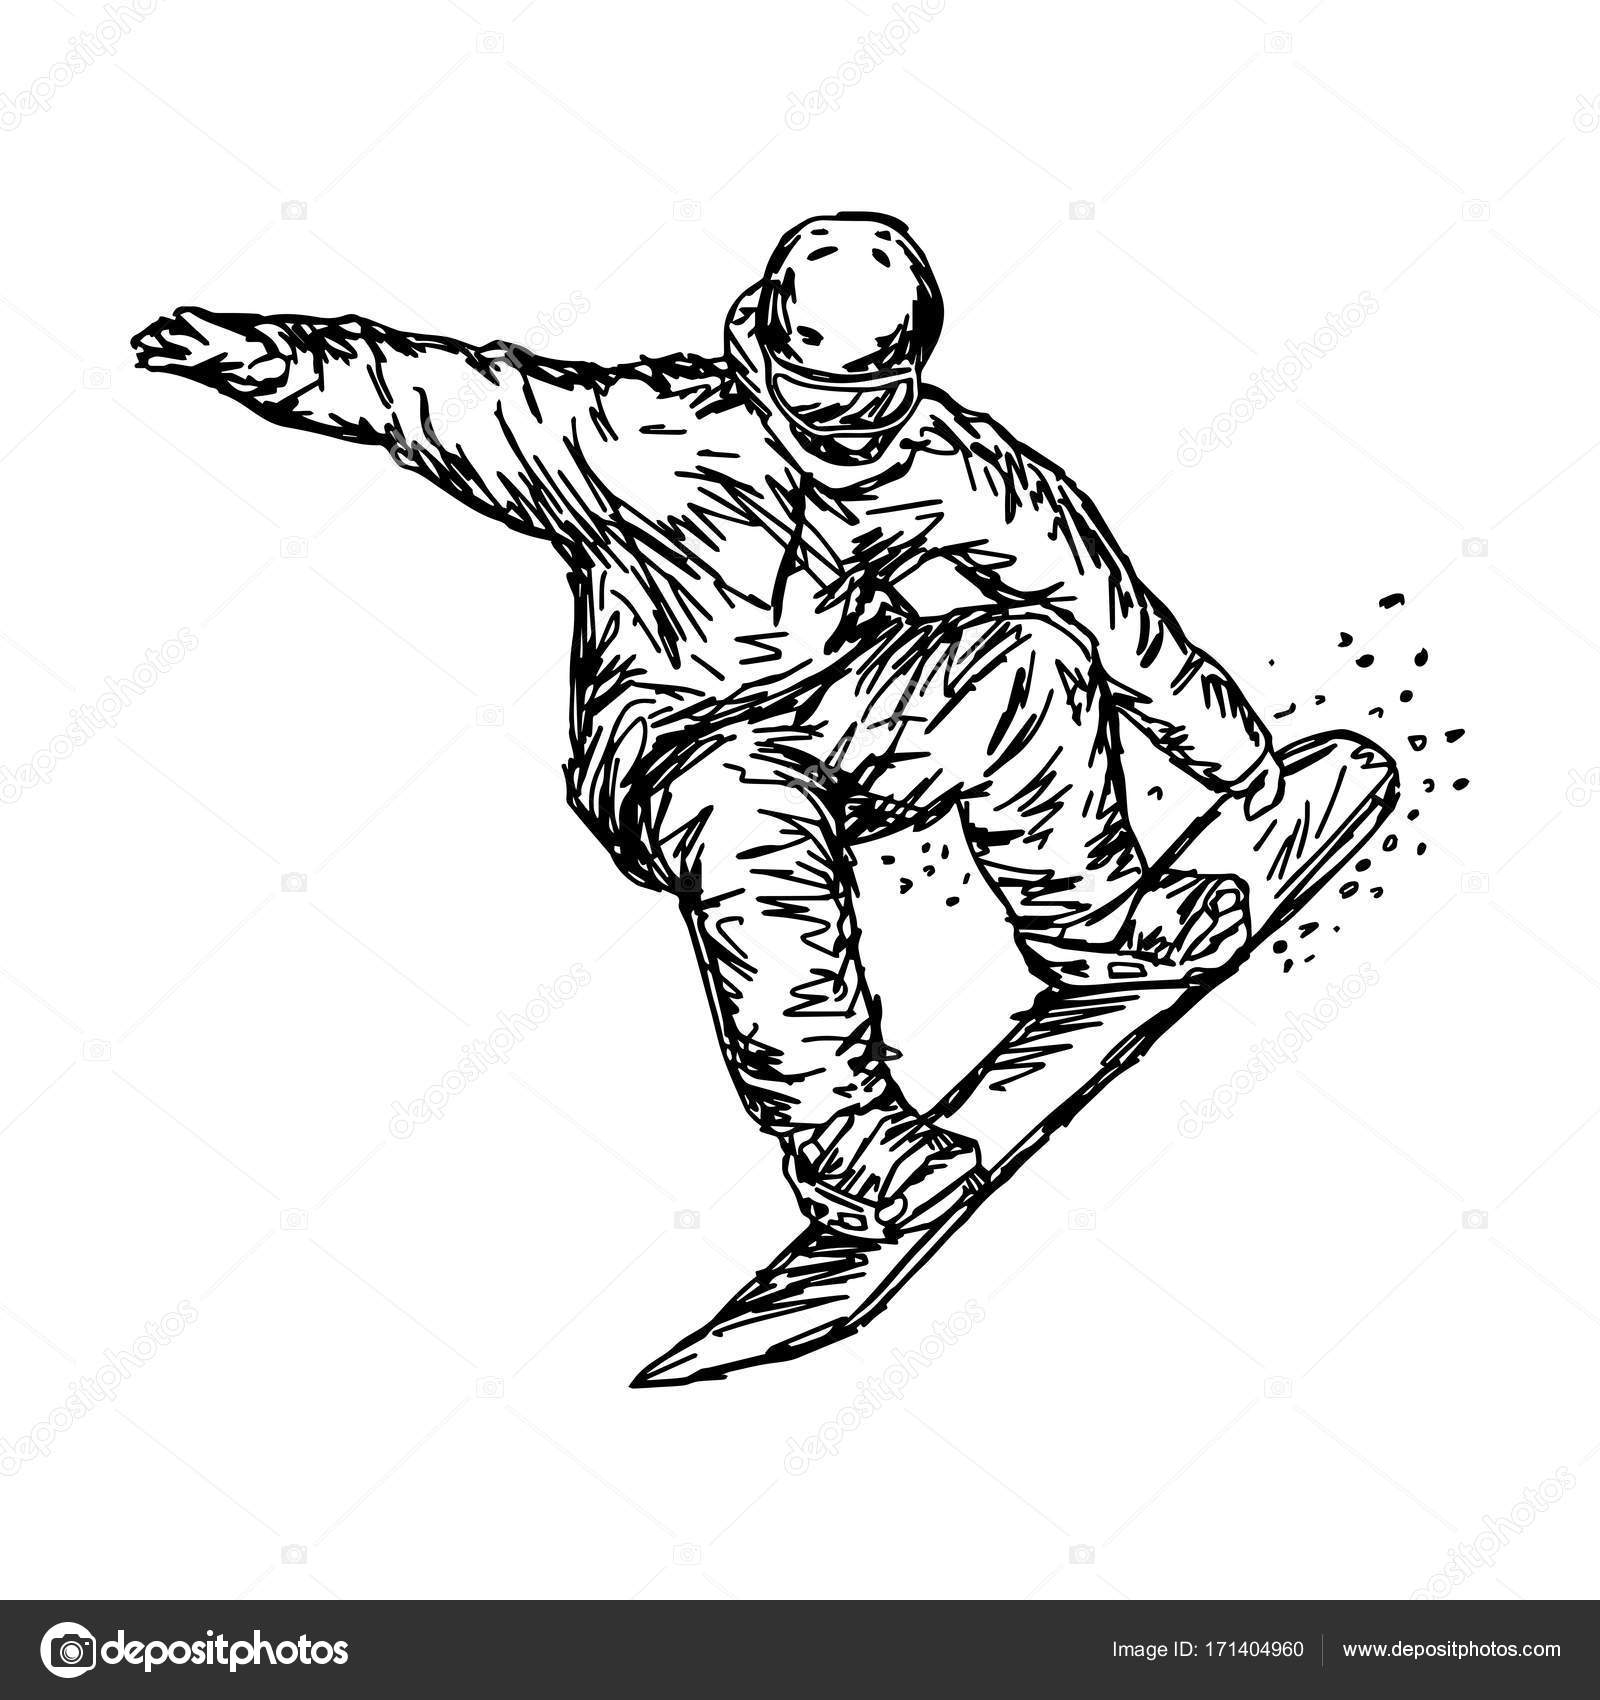 Snowboarder Drawing at GetDrawings.com | Free for personal use ...